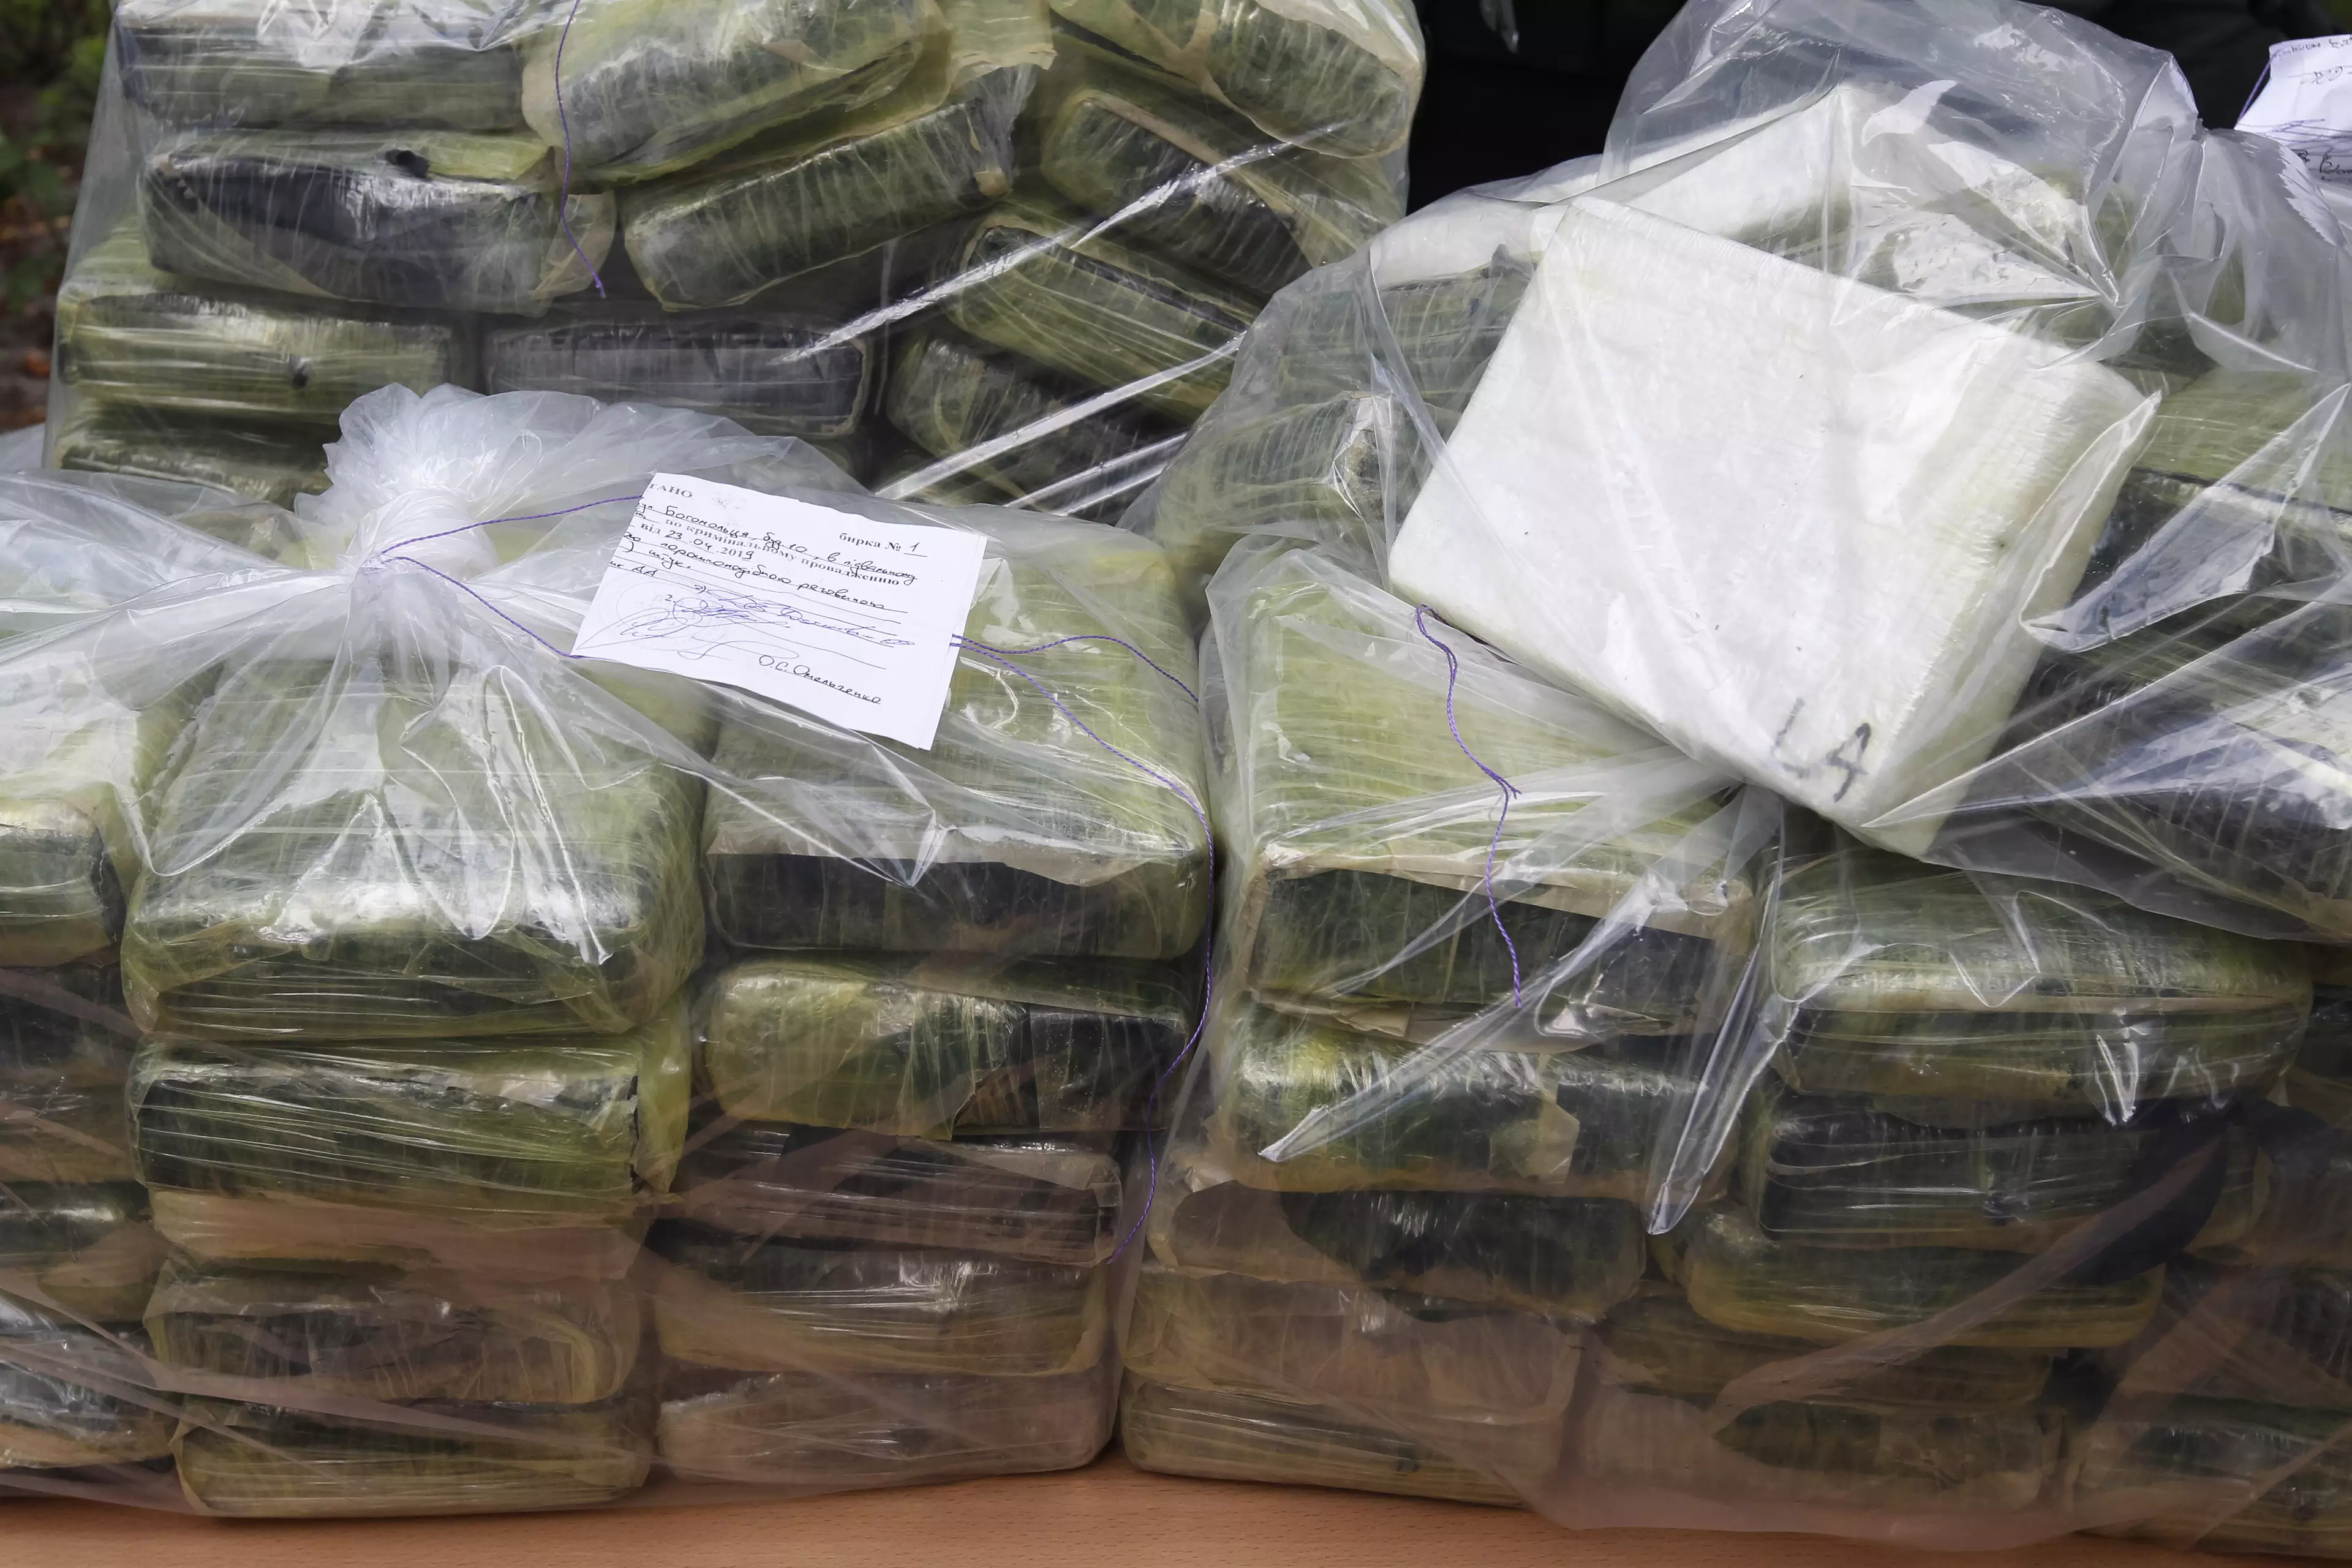 Cocaine seized by the Colombian military.